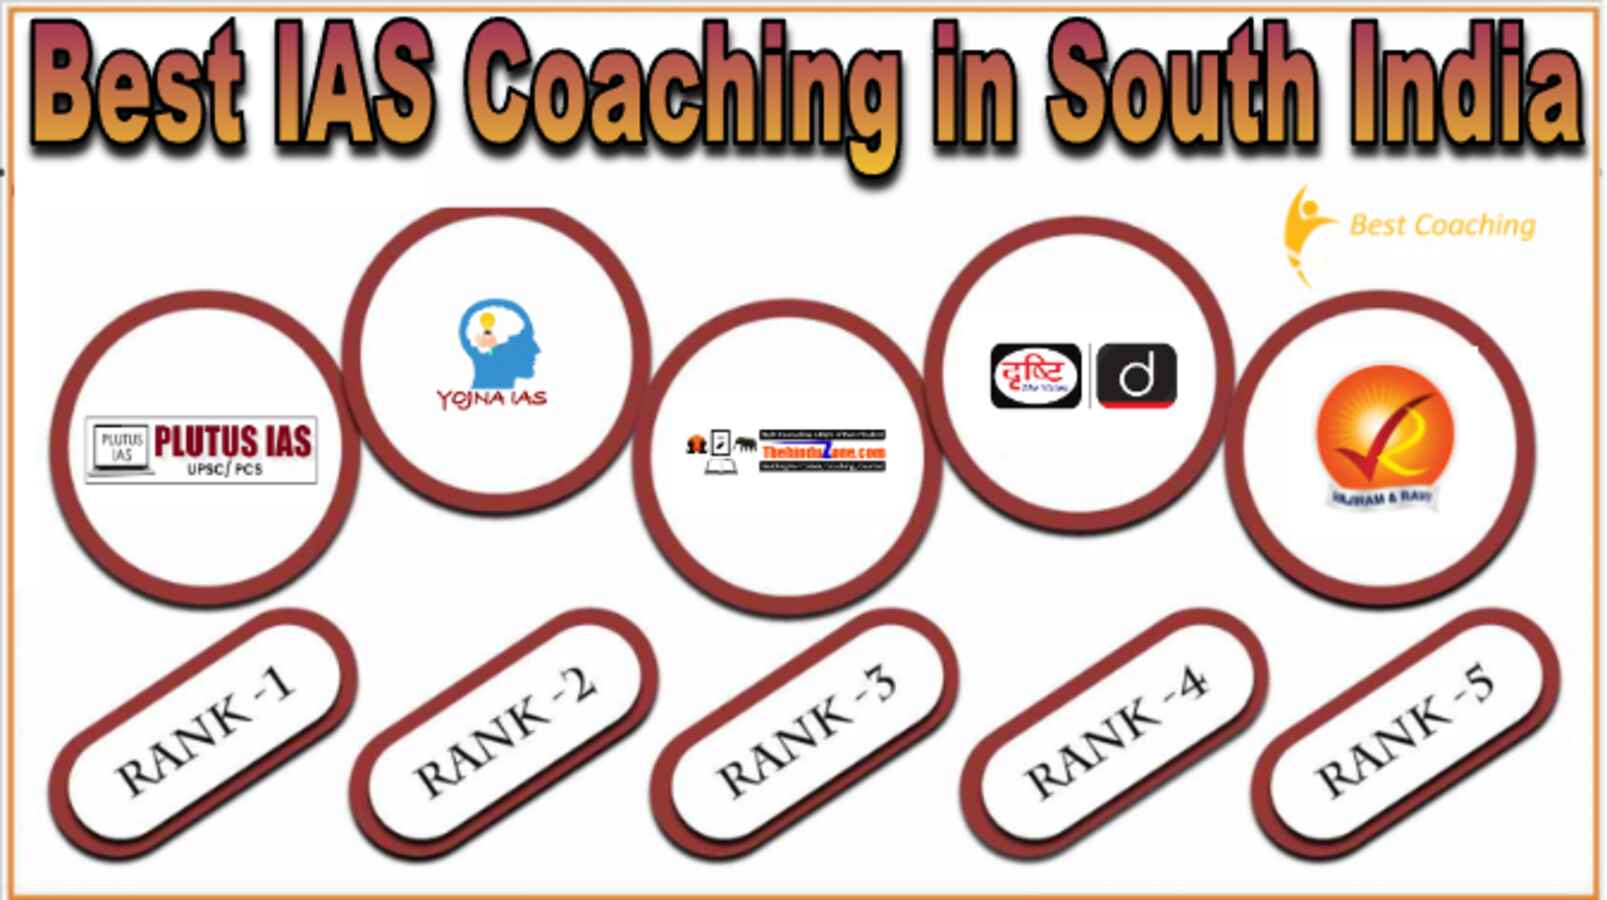 Best IAS Coaching in South India